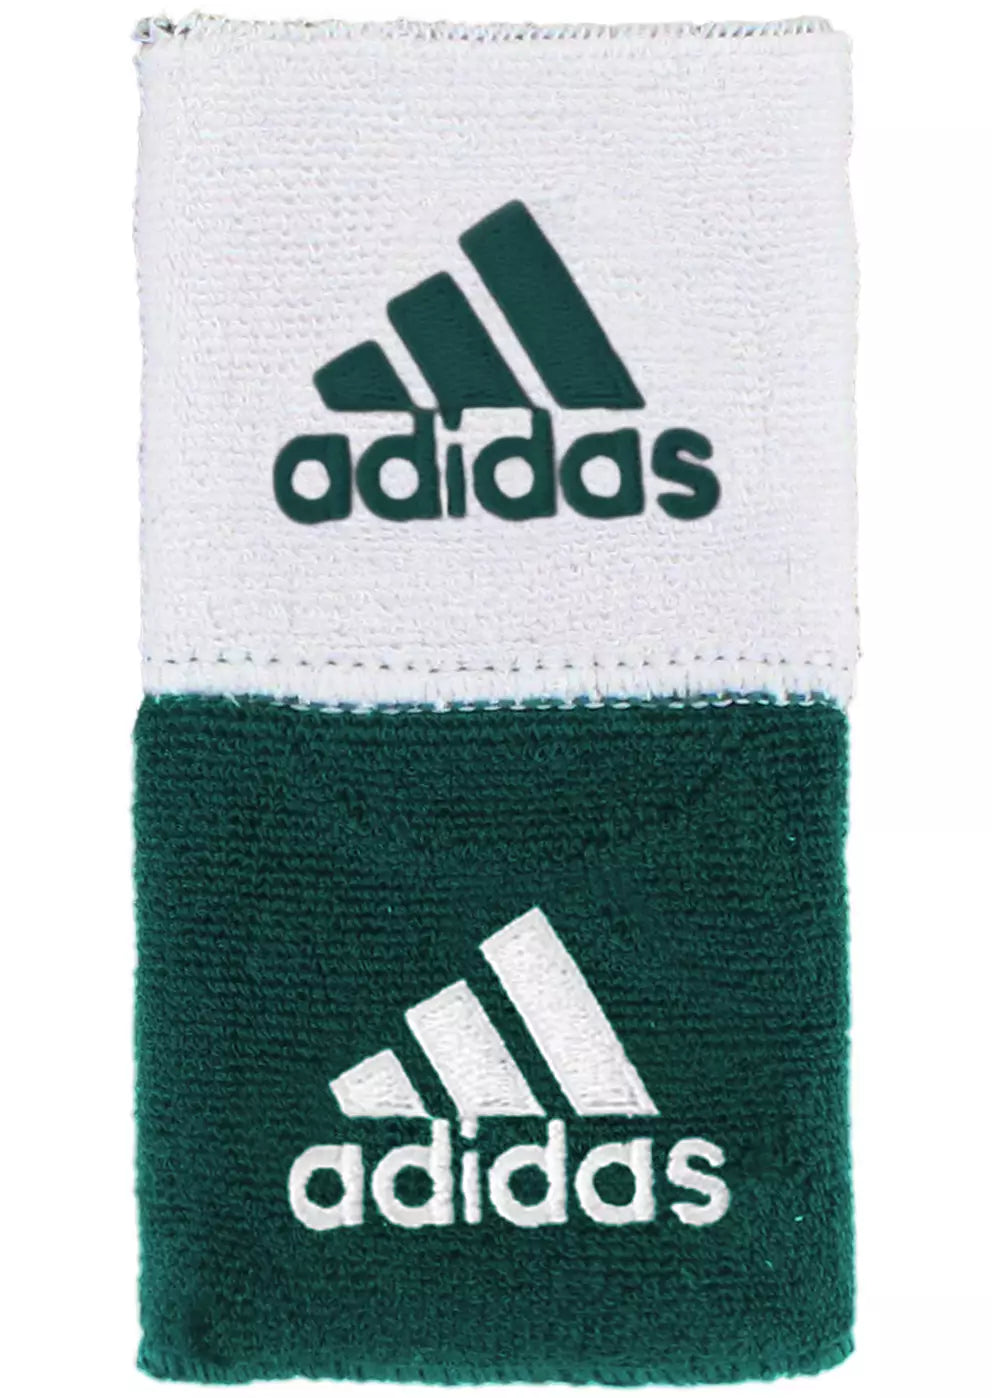 Adidas Interval Reversible Wristbands - 3"